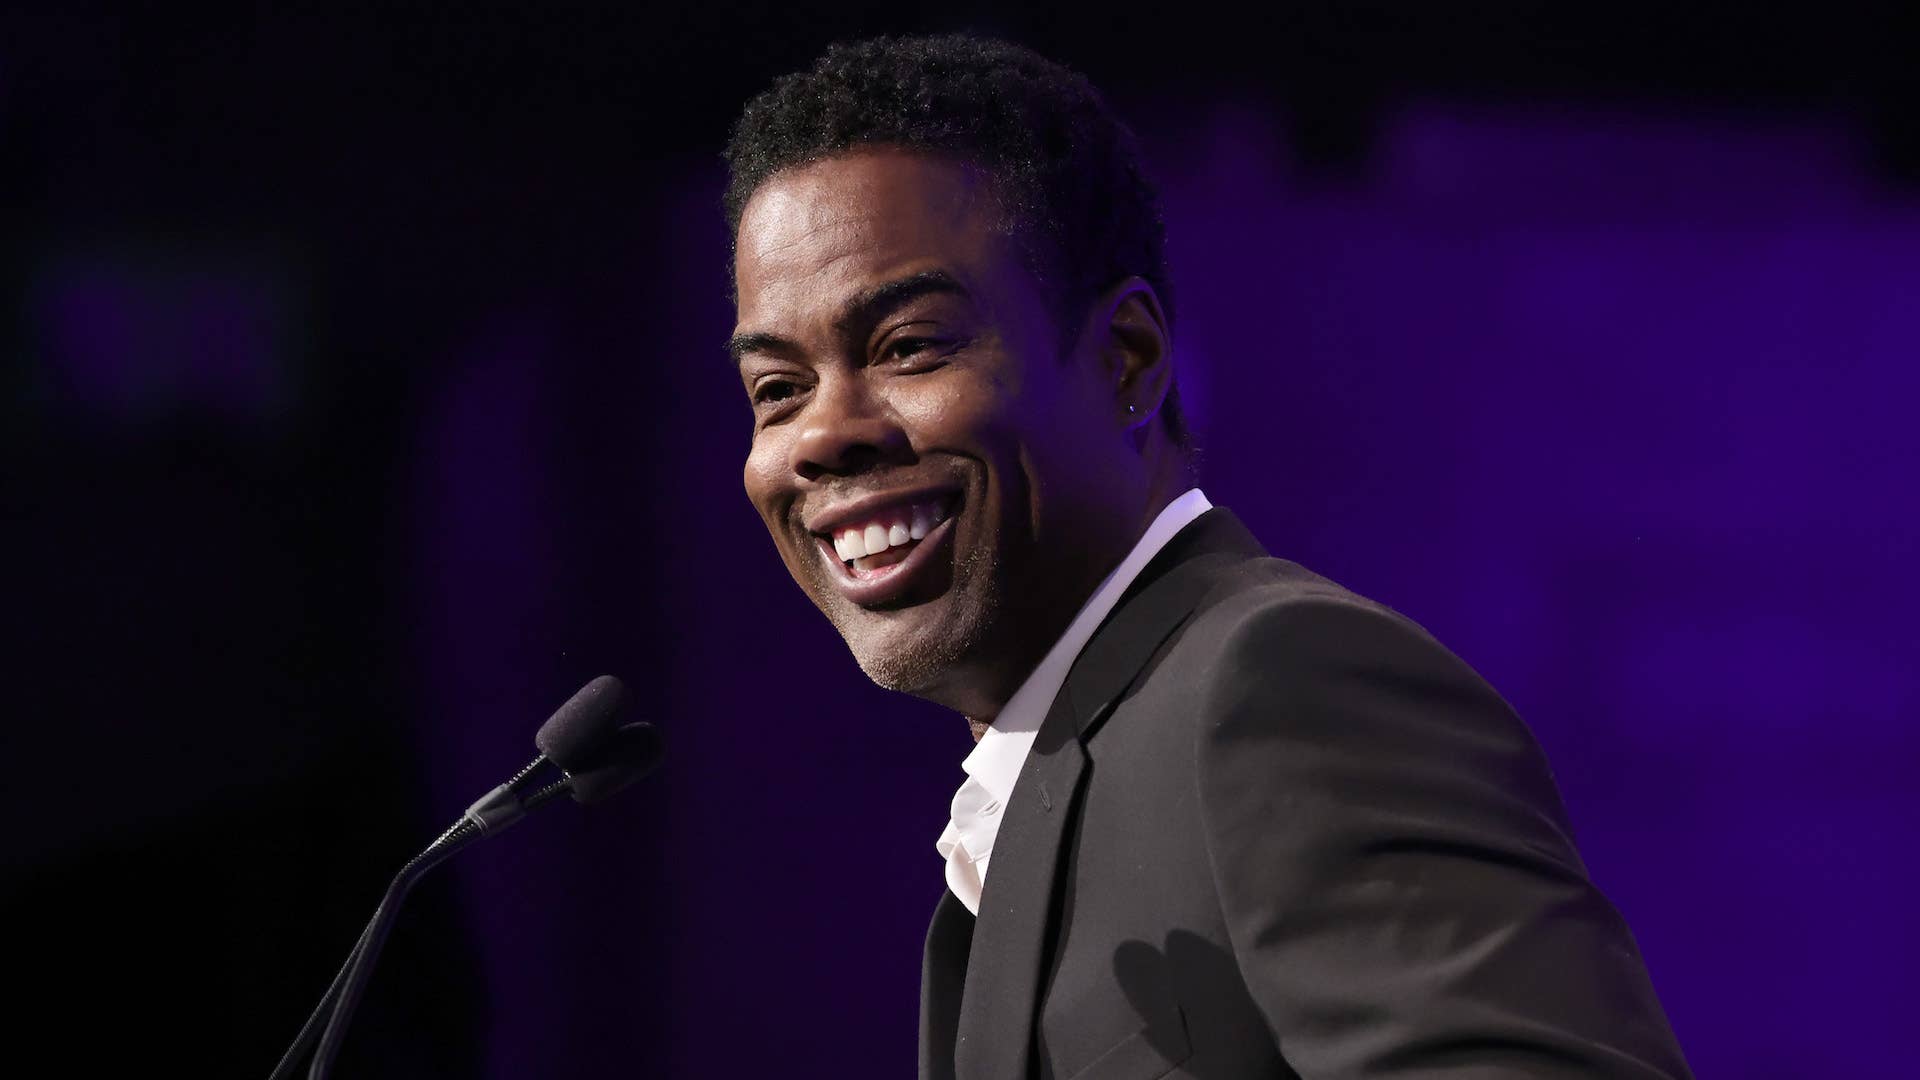 Chris Rock speaks onstage at the National Board of Review annual awards